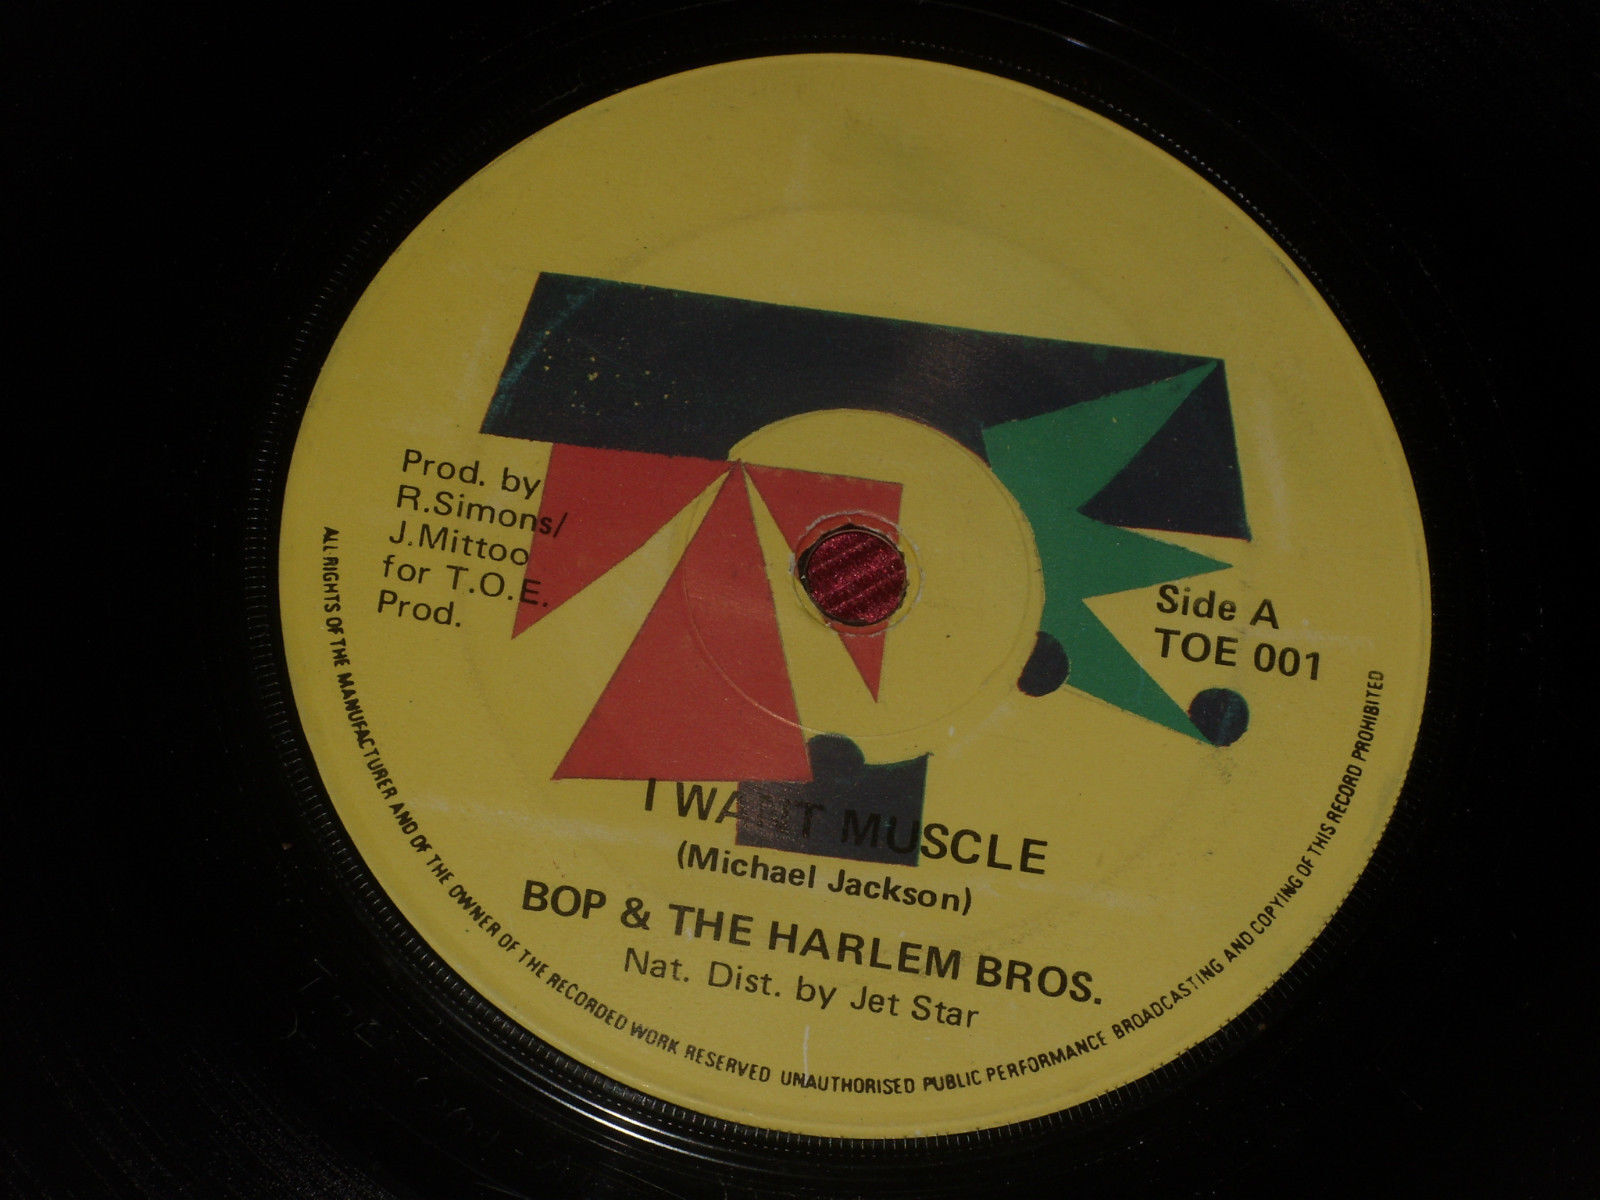 Bop & The Harlem Bros:  I want muscle   7"   EX   Toe records